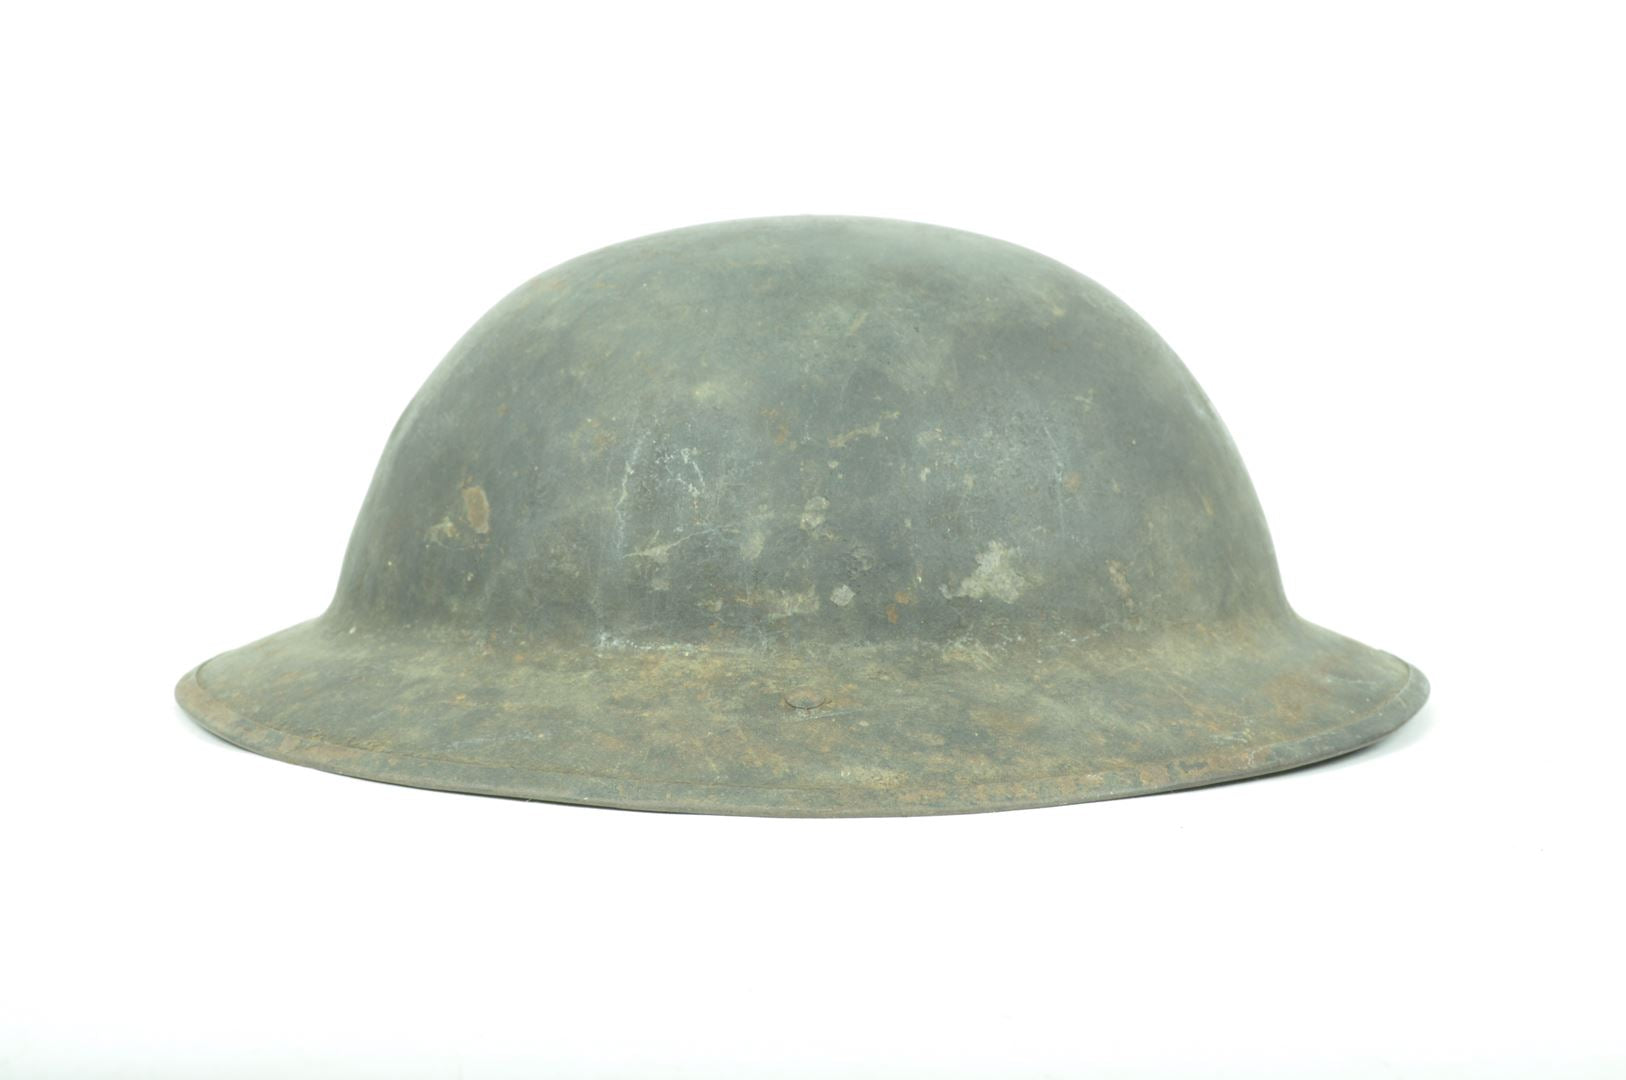 Casque US 17 / 27th infantry division